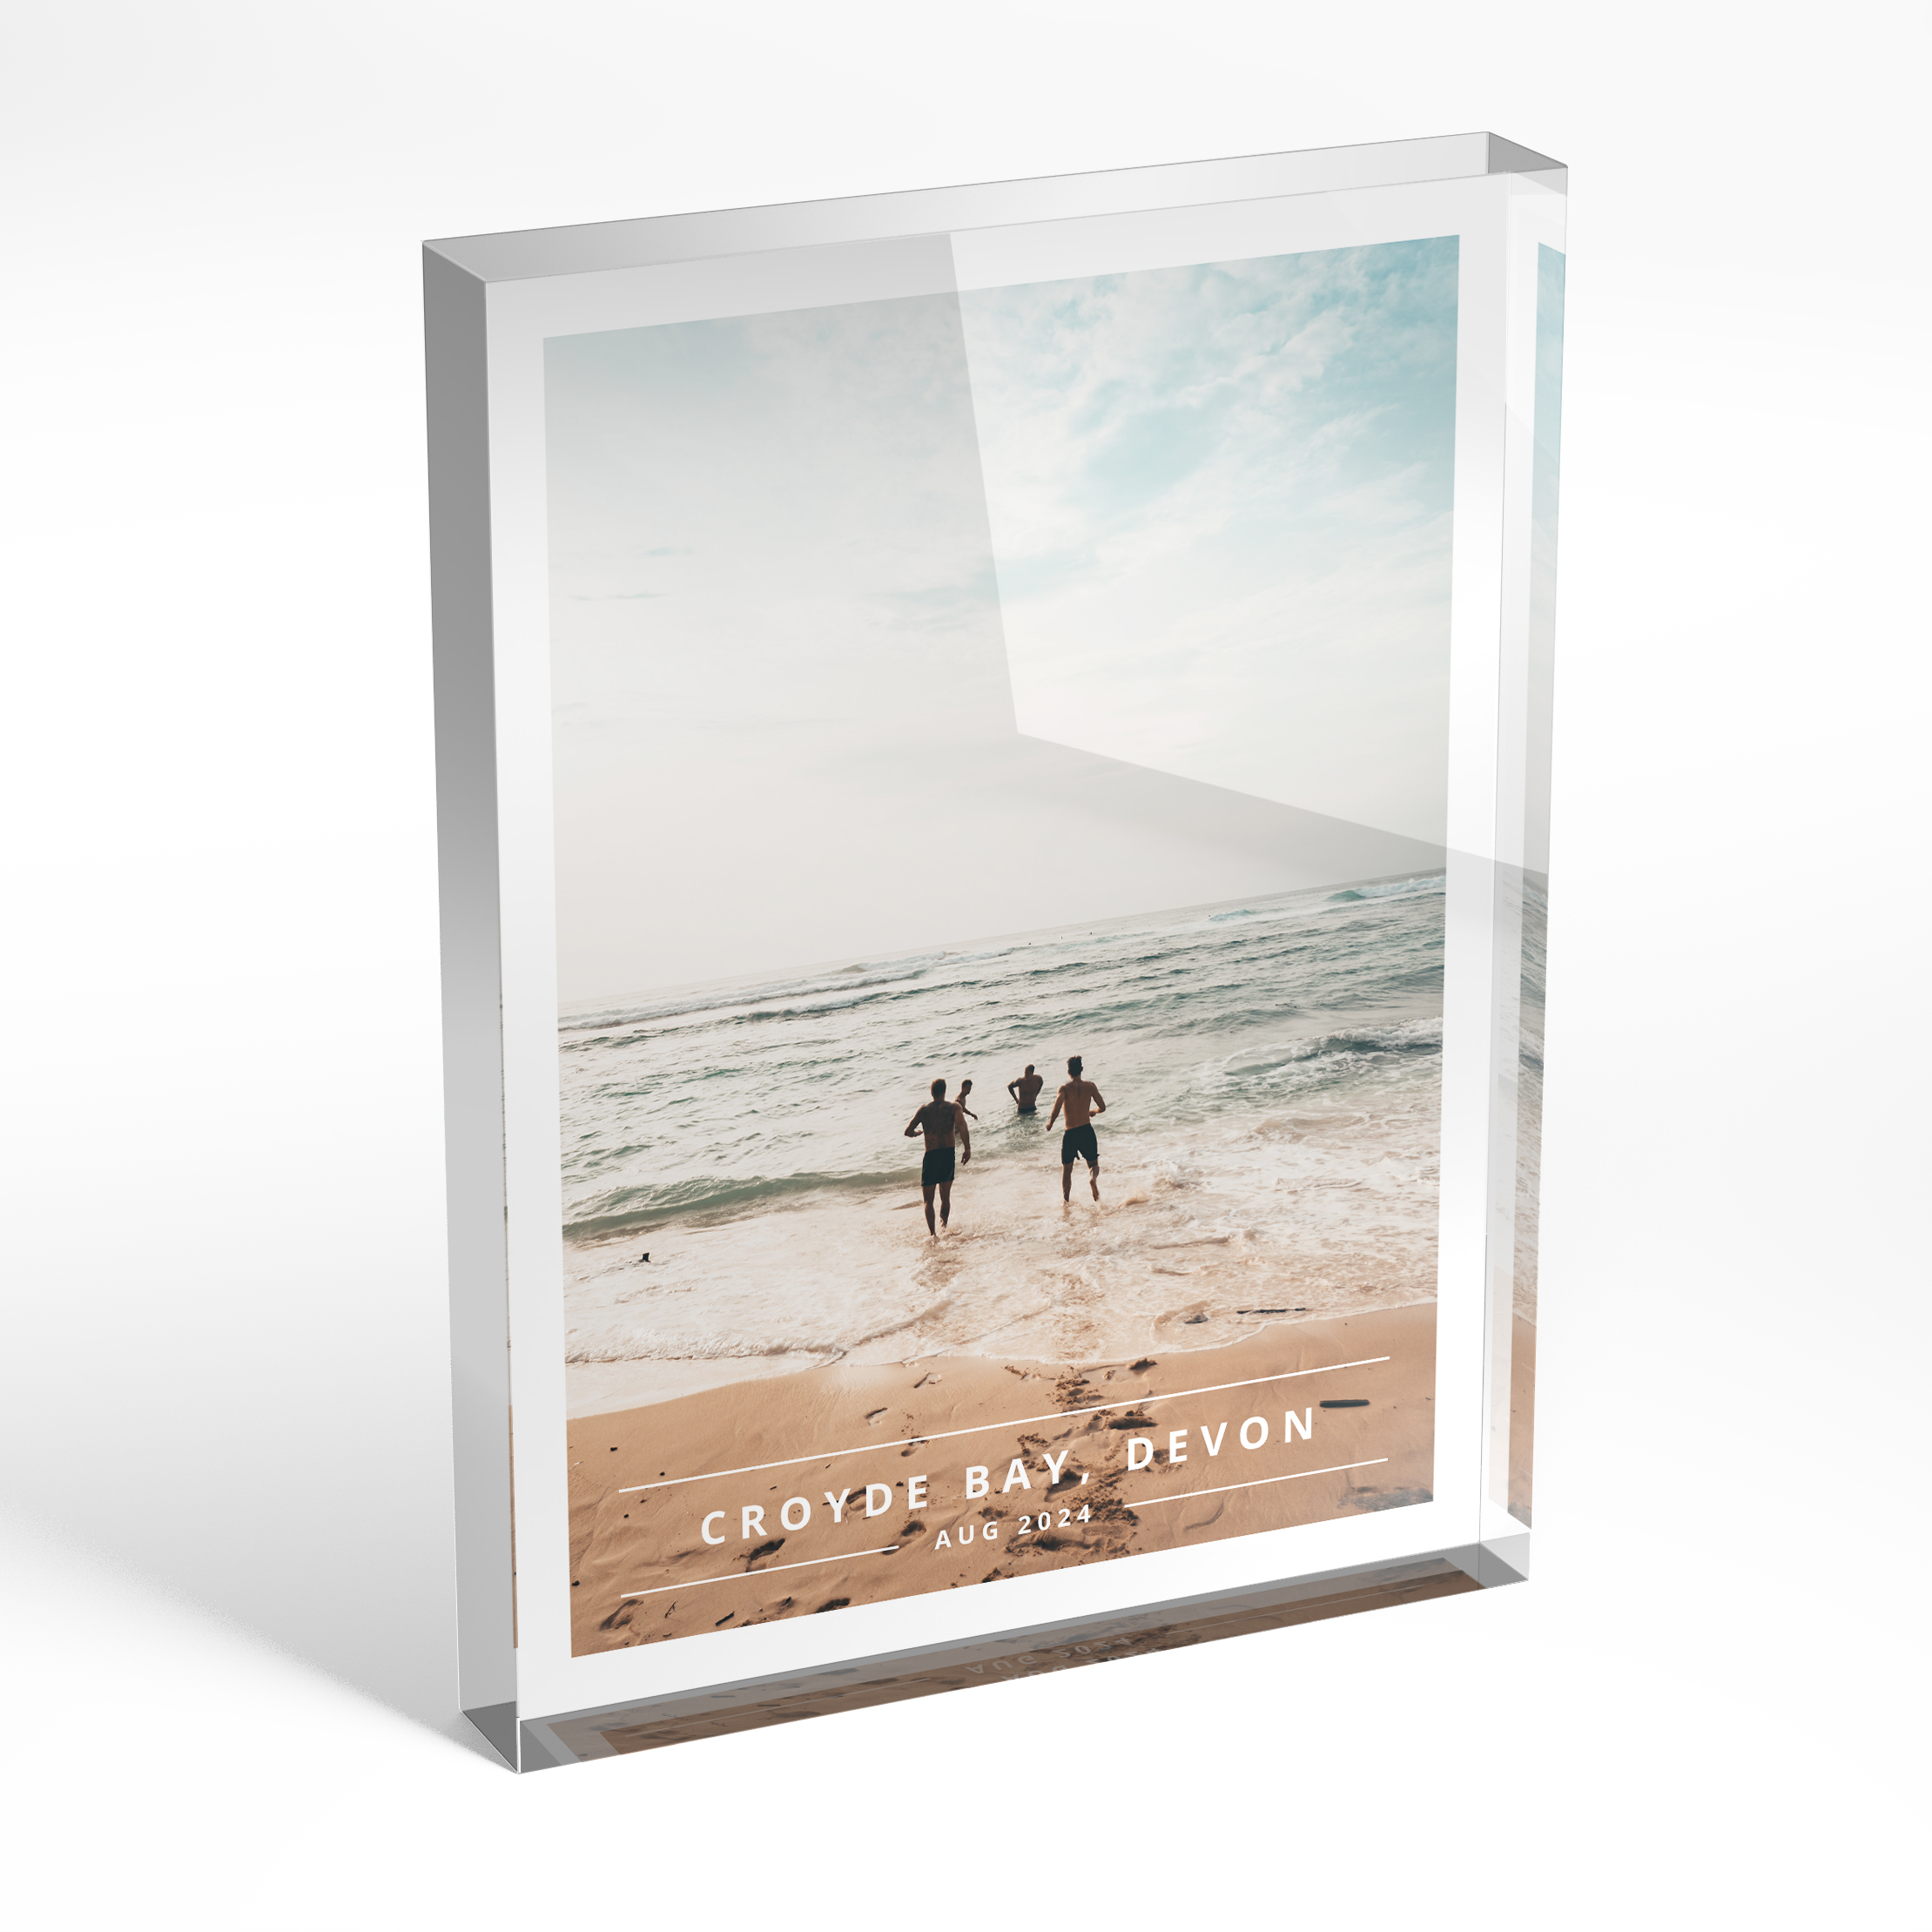 A front side view of a portrait layout Acrylic Glass Photo Block with space for 1 photo. Thiis design is named 'There and then'. 